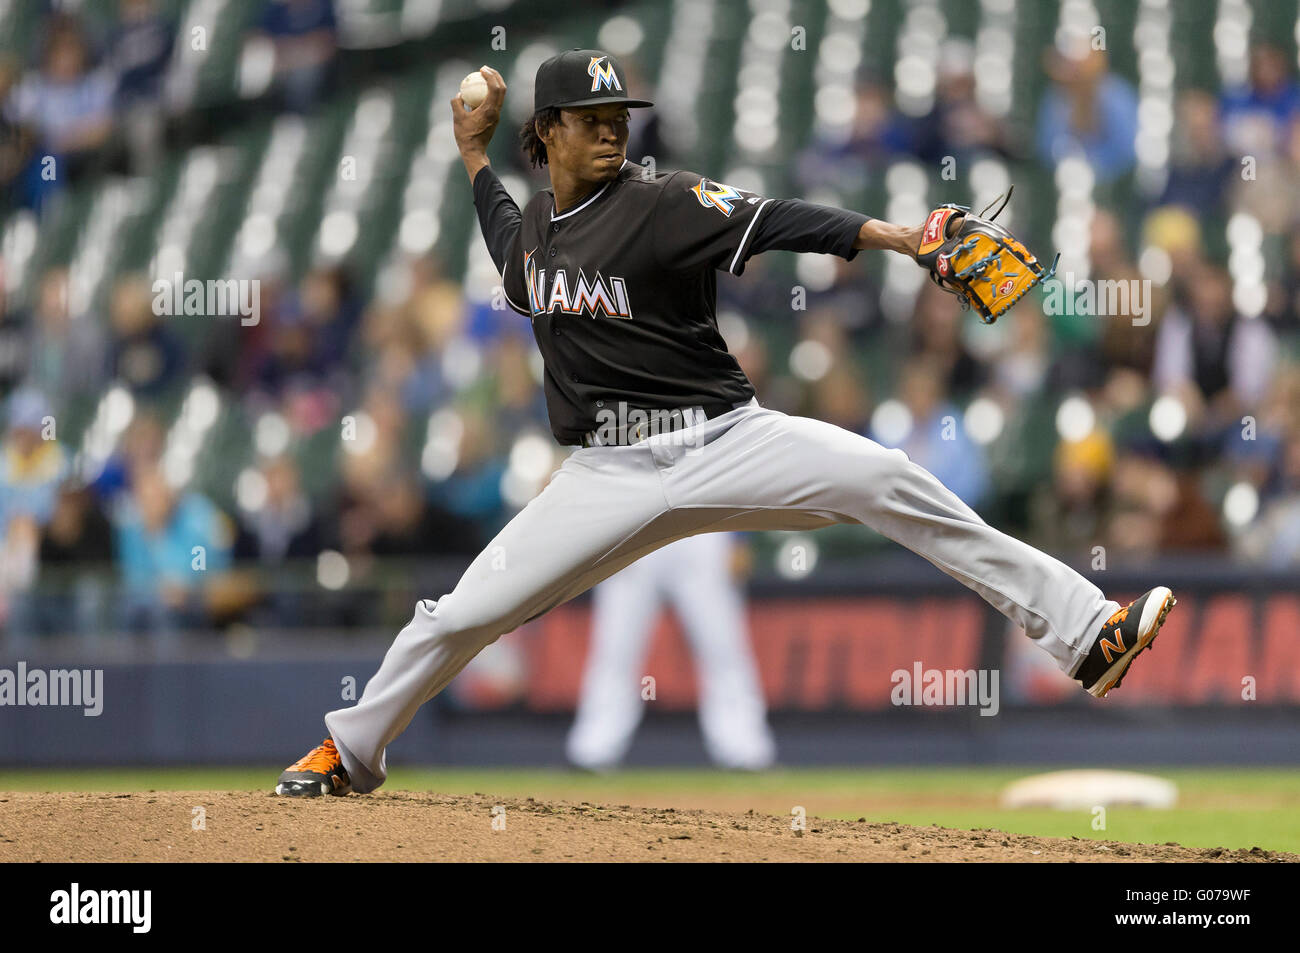 Milwaukee, WI, USA. 29th Apr, 2016. Miami Marlins relief pitcher Jose Urena #62 delivers a pitch in the Major League Baseball game between the Milwaukee Brewers and the Miami Marlins at Miller Park in Milwaukee, WI. John Fisher/CSM/Alamy Live News Stock Photo